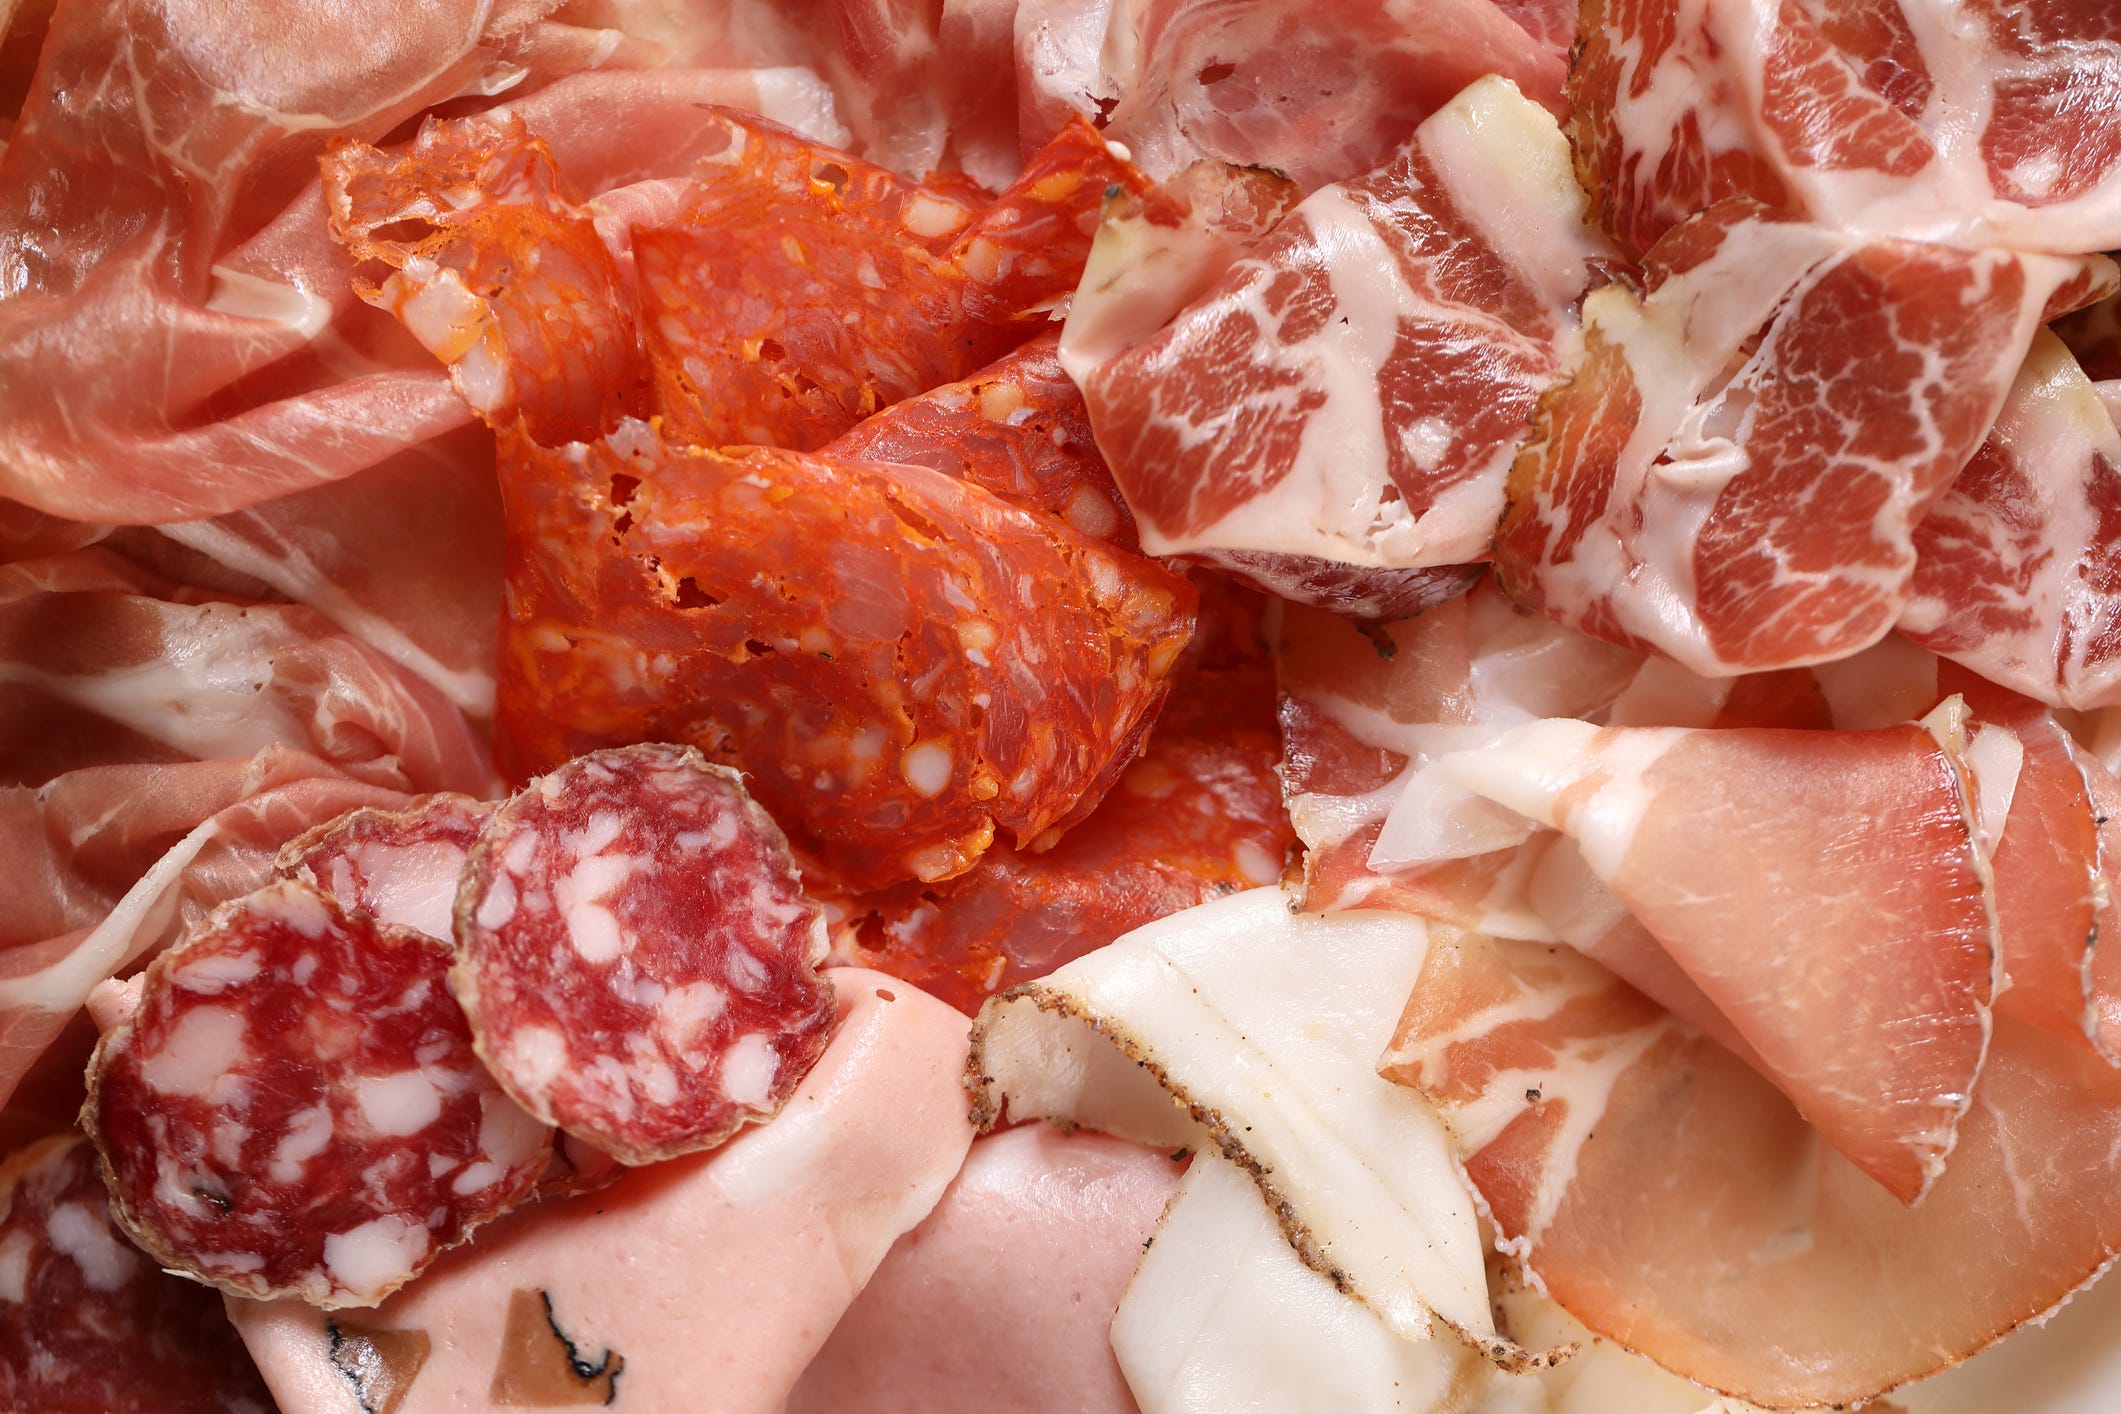 According to the study, processed meat was linked to the greatest risk of early death.